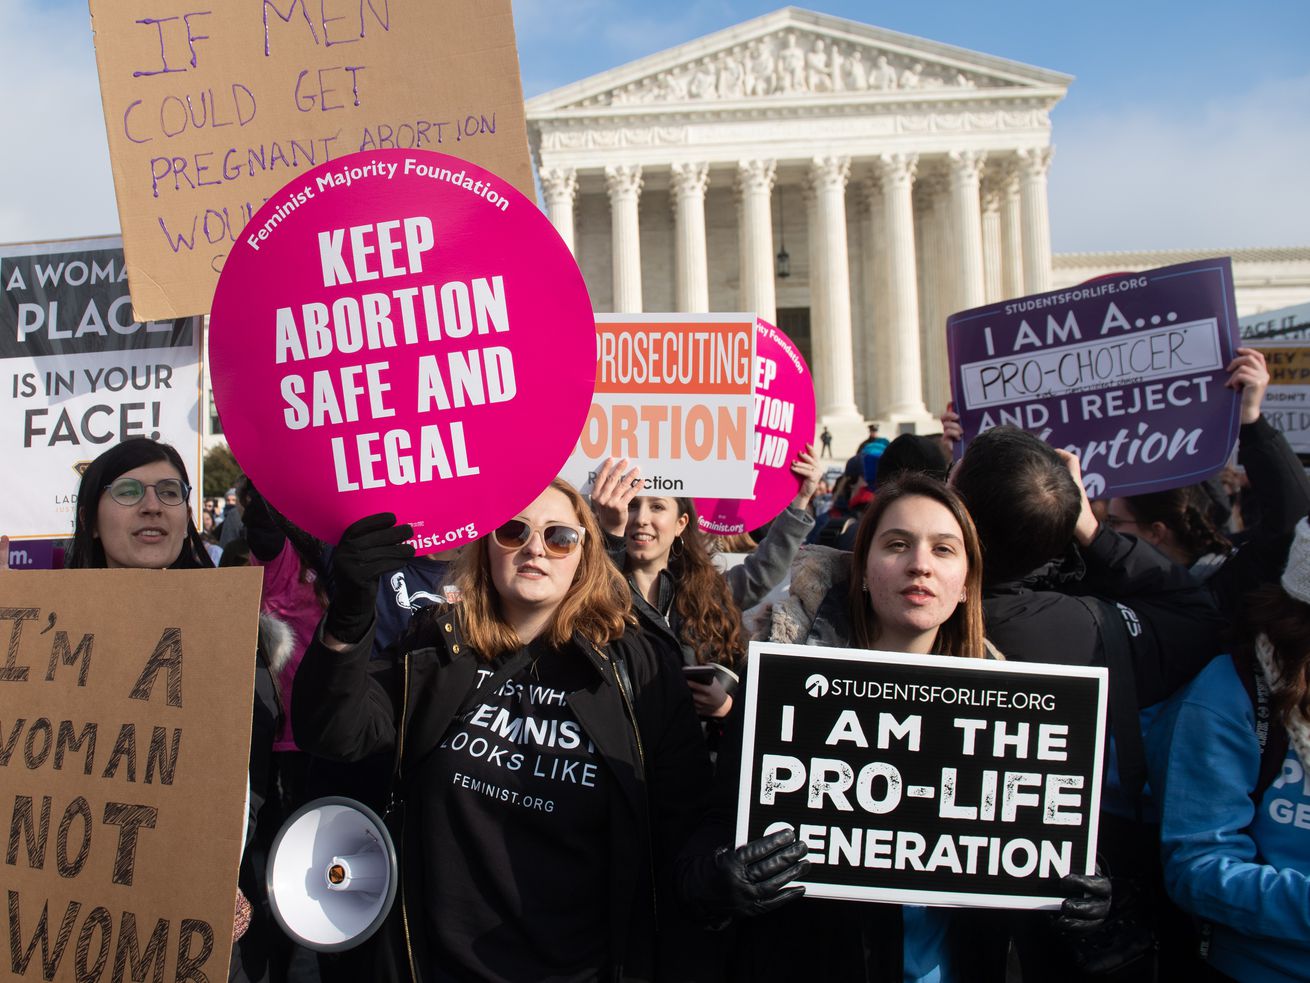 People at a rally outside the Supreme Court building carry signs that read “Keep abortion safe and legal” as well as “I am the pro-life generation.”